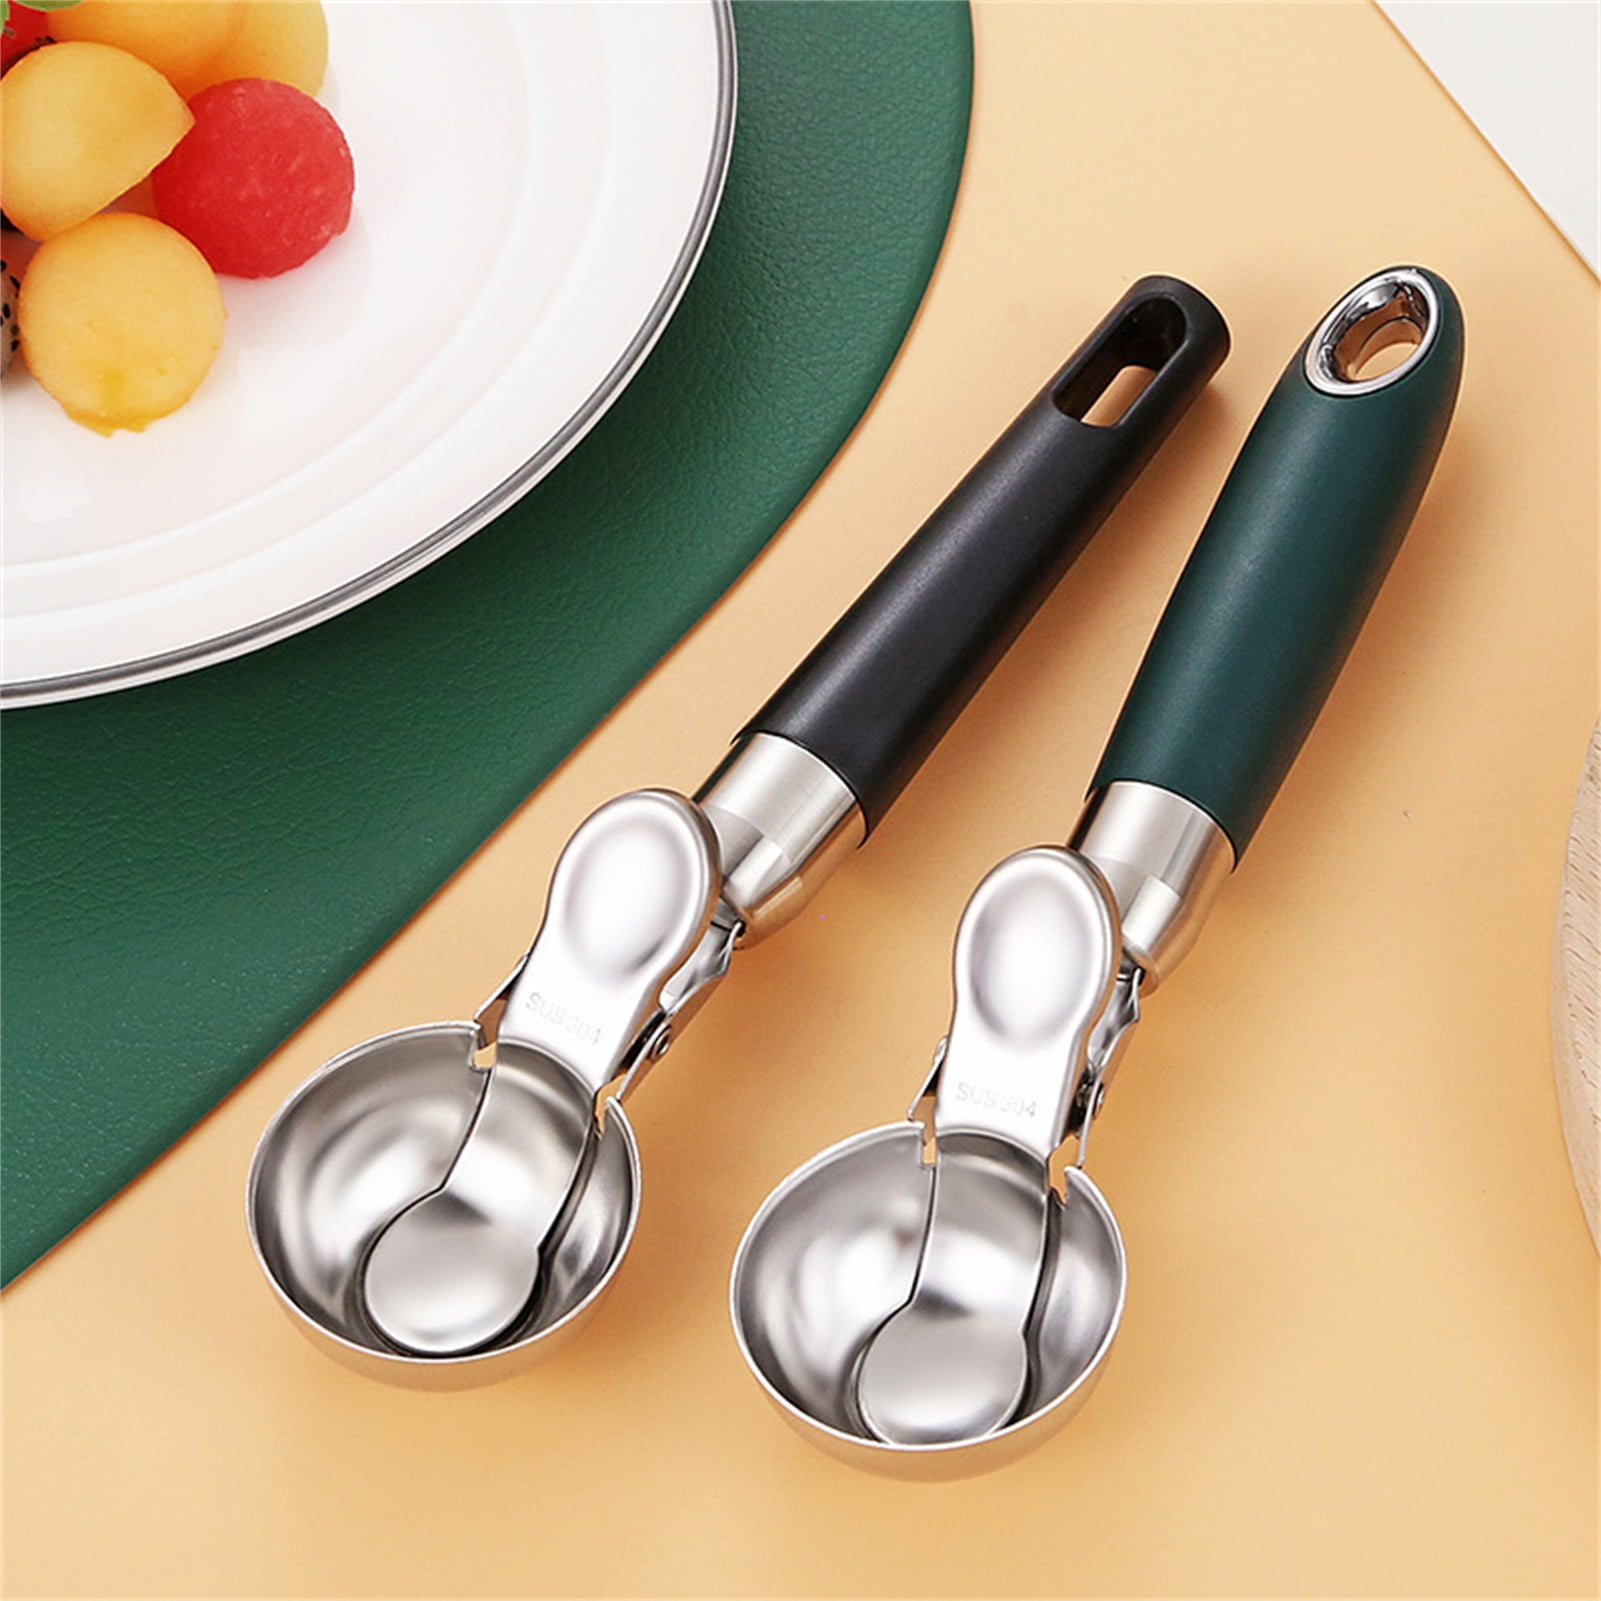 Cutco Ice Cream Scoop Polished Stainless Steel with Black Handle 8 3/8